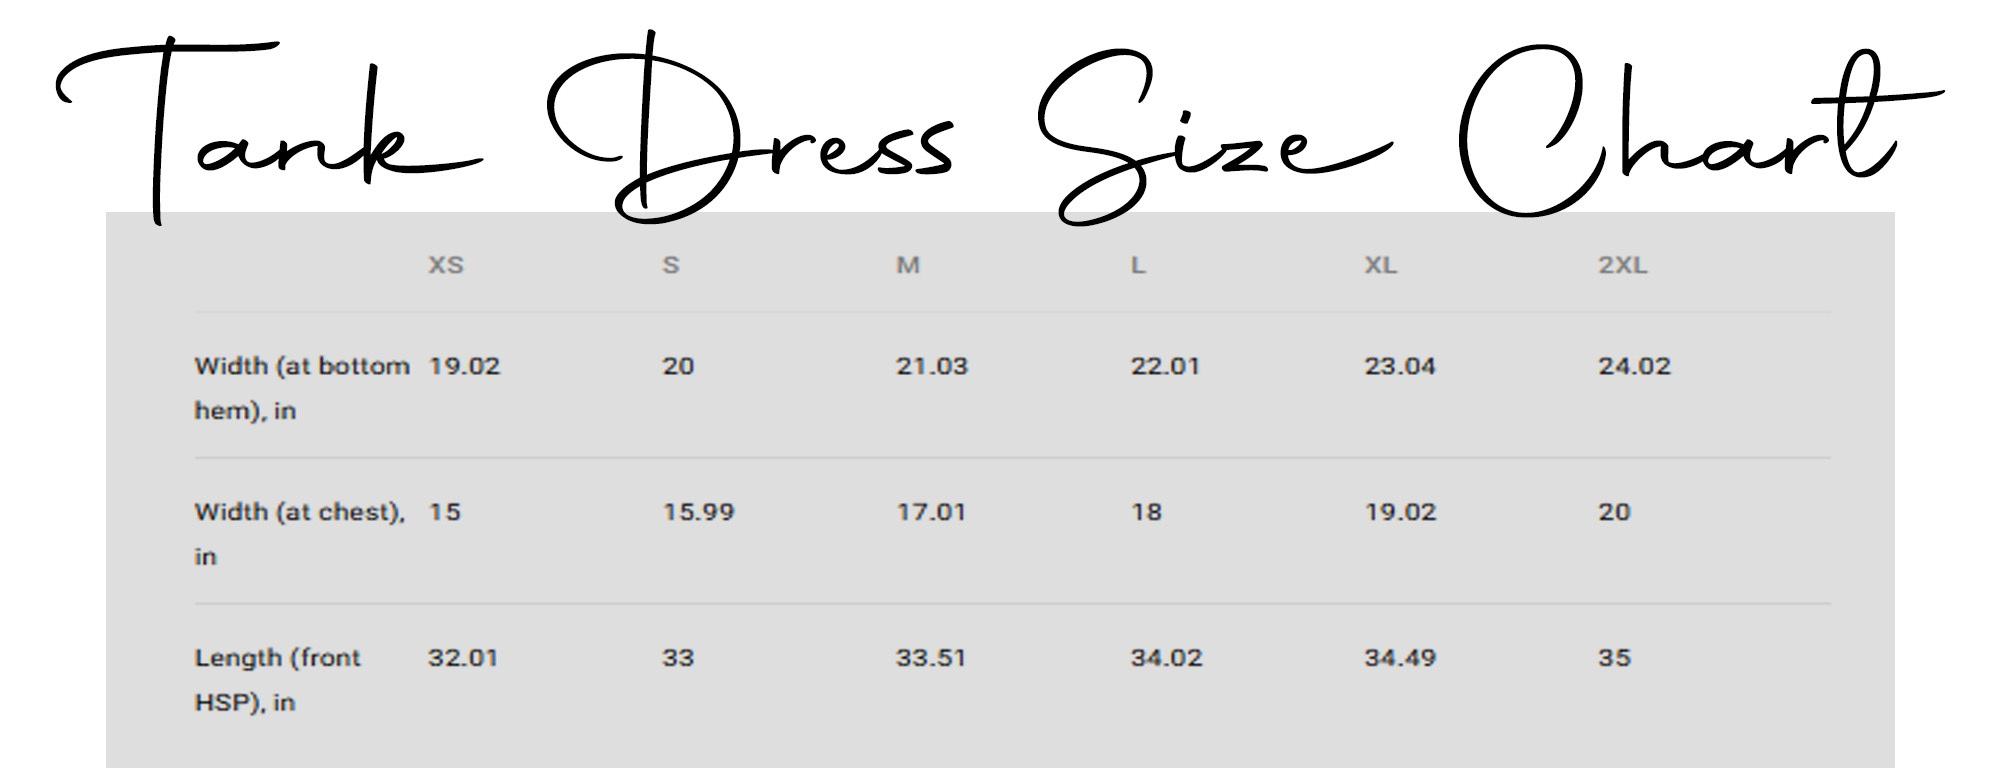 Thick Fil A Tank Mini Dress For Teens and Women